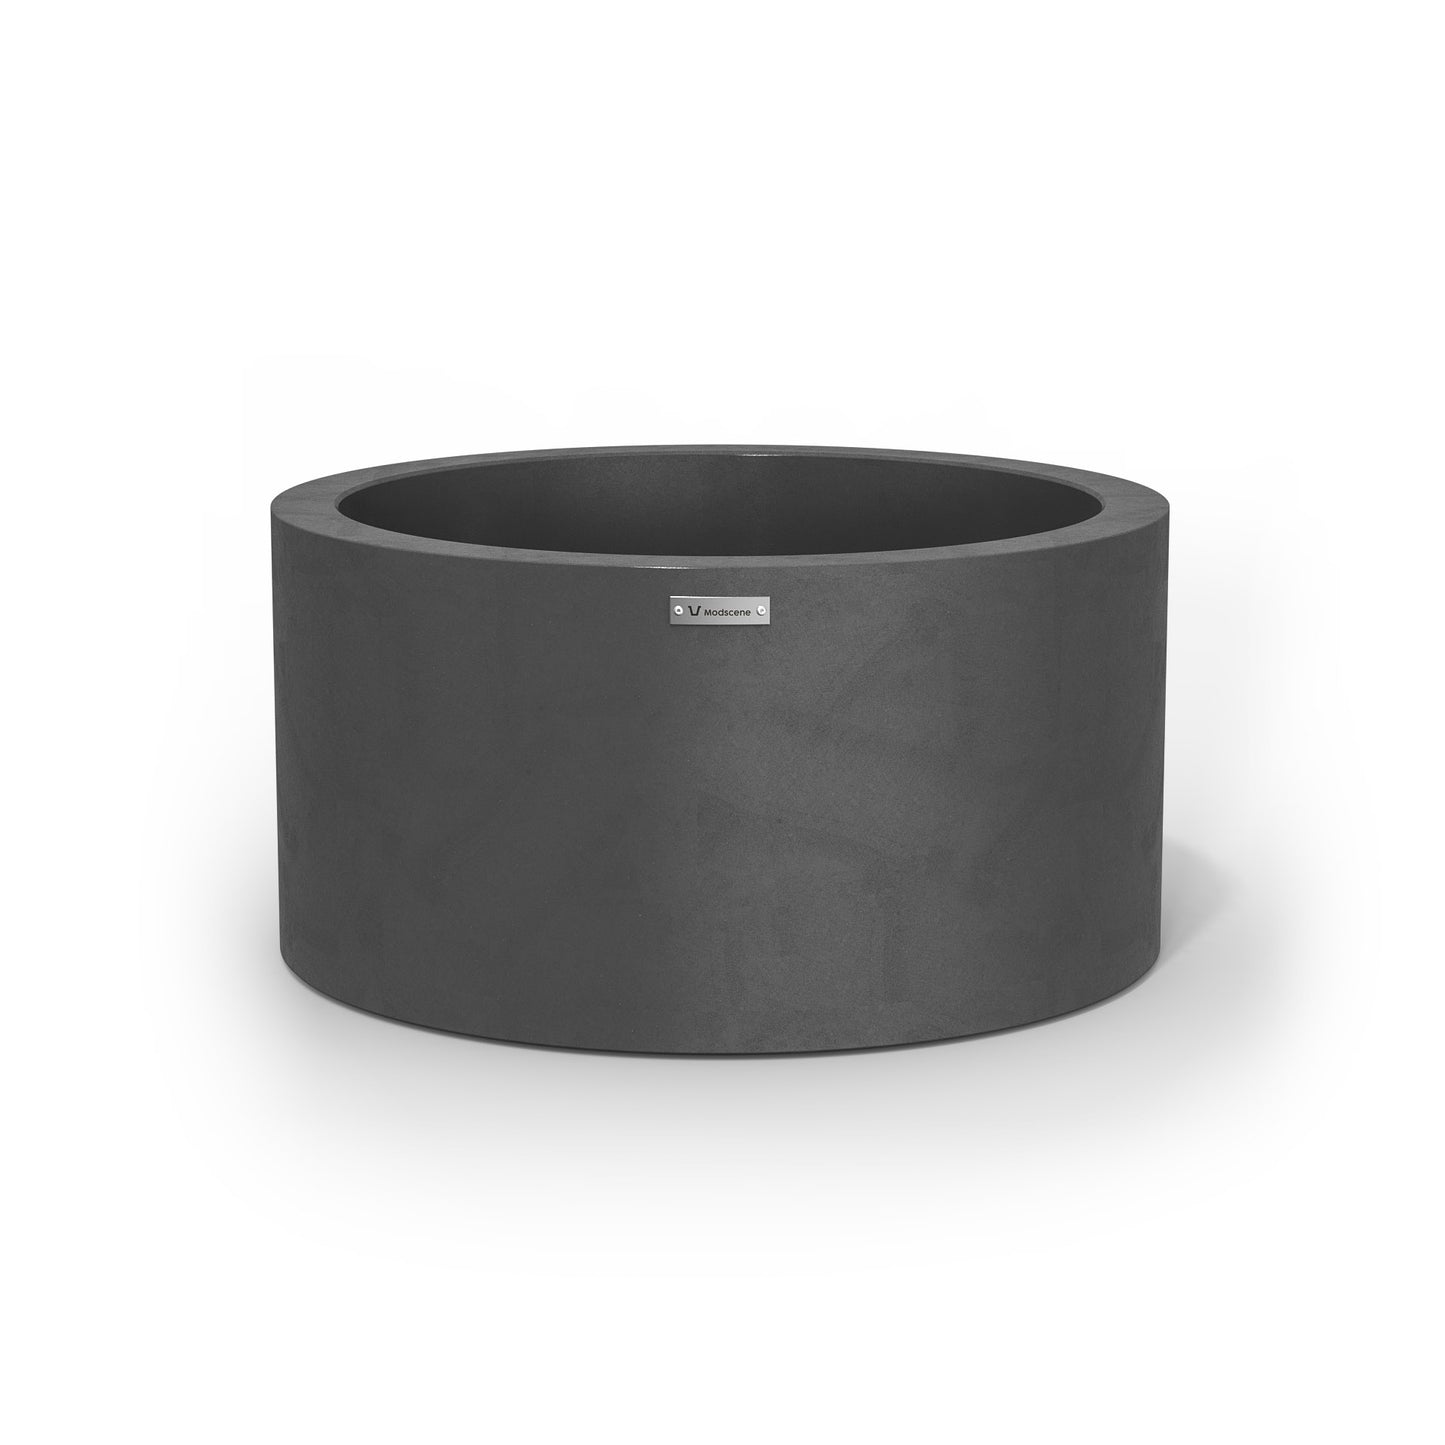 A cylinder shaped pot planter in a brushed grey colour.